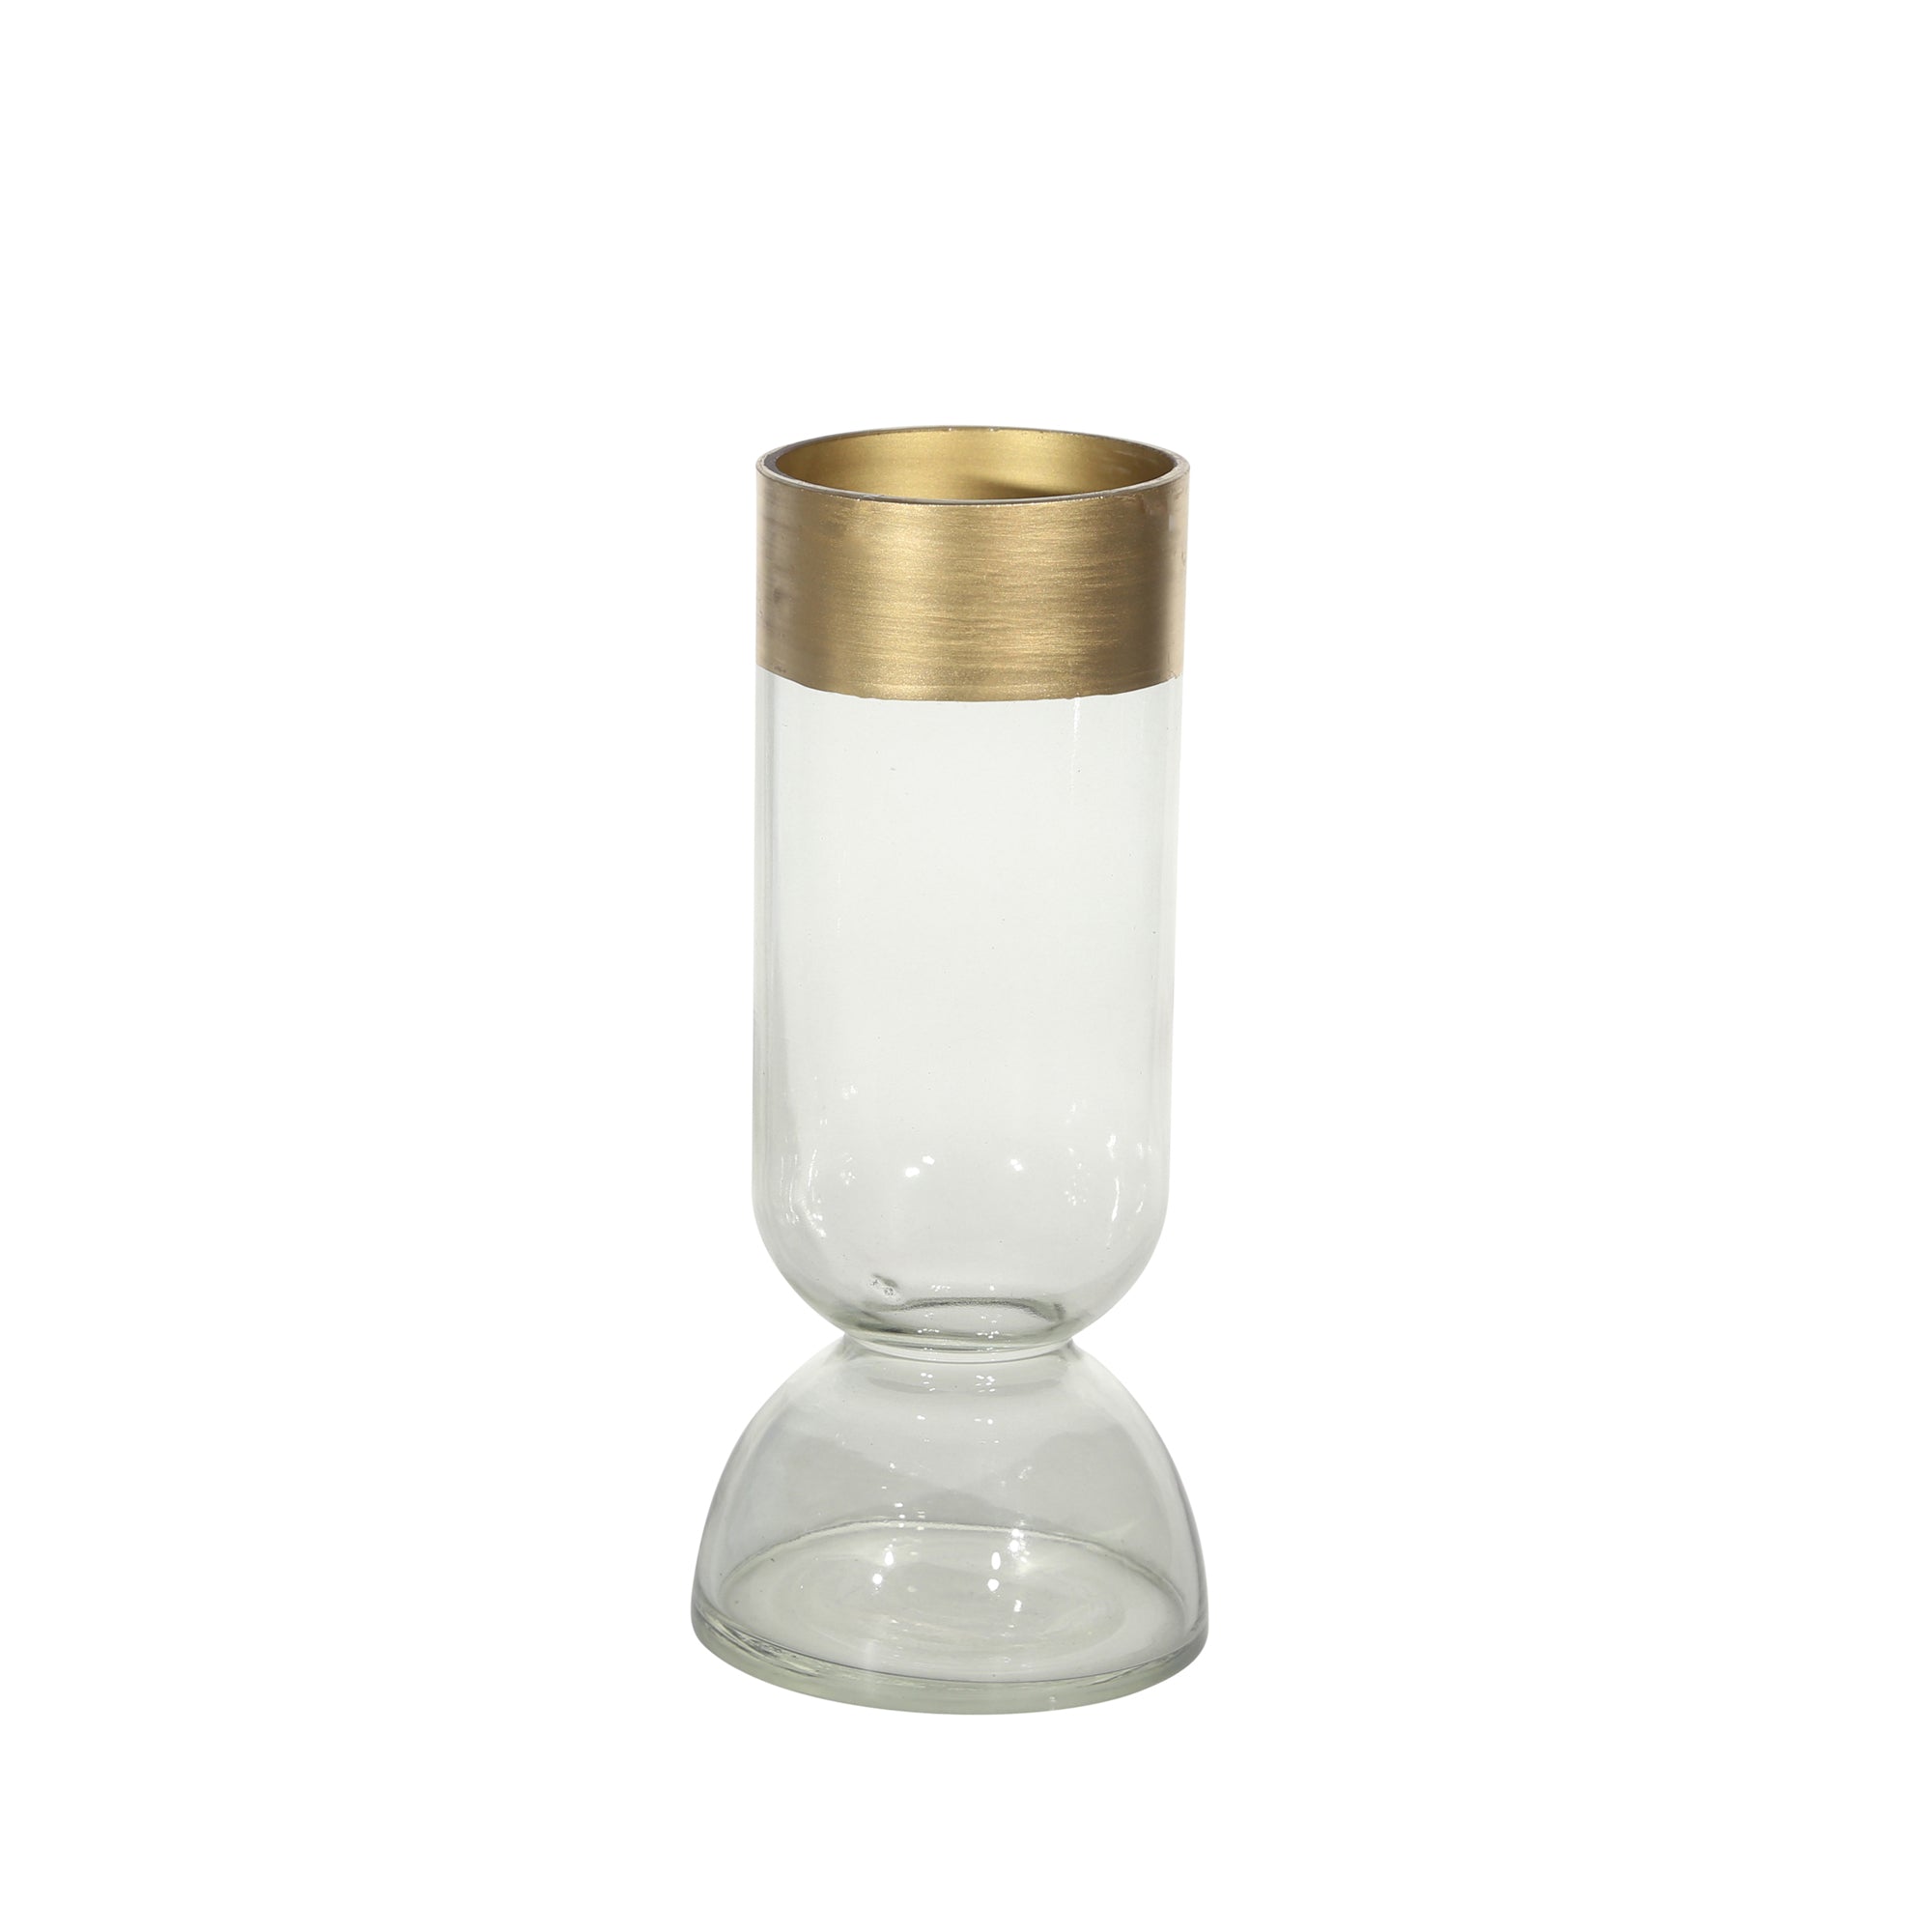 GLASS VASE WITH GOLD RIM - SMALL